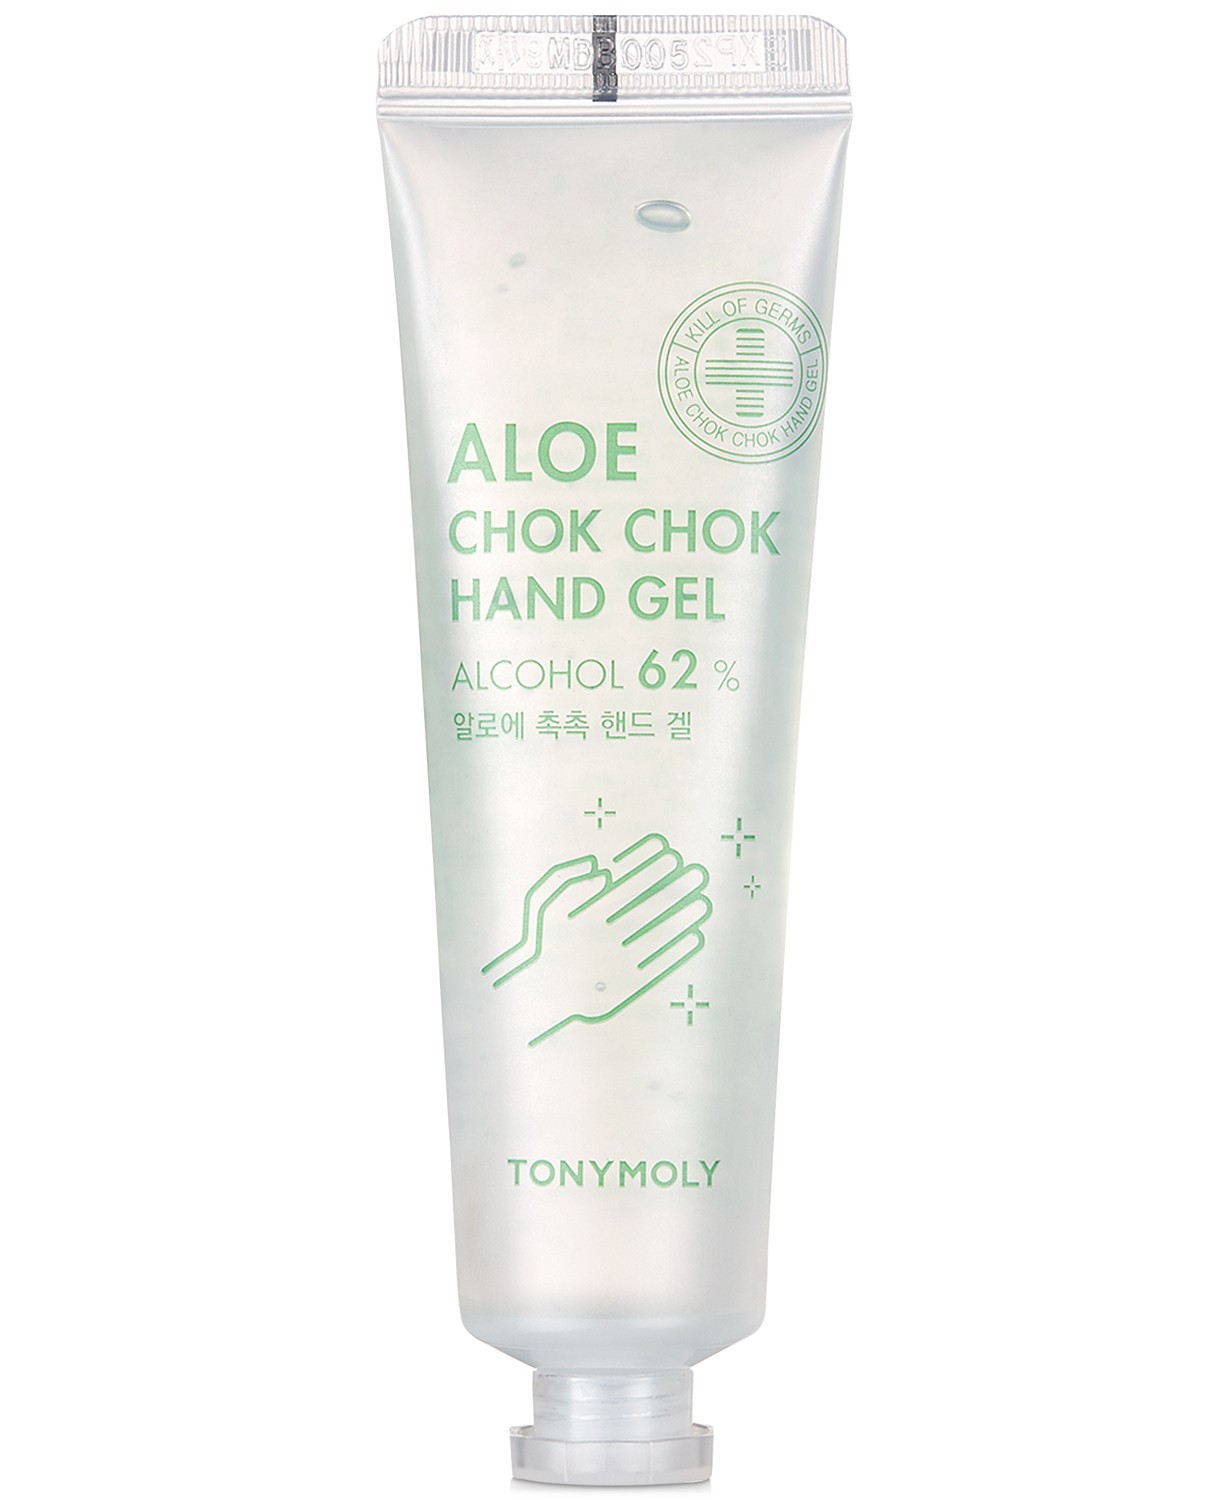 TONYMOLY Aloe Chok Chok Hand Gel Sanitizer 2 for $1.80 ($0.90/each) or less w/ SD Cashback & More at Macy's w/ Free Store Pickup